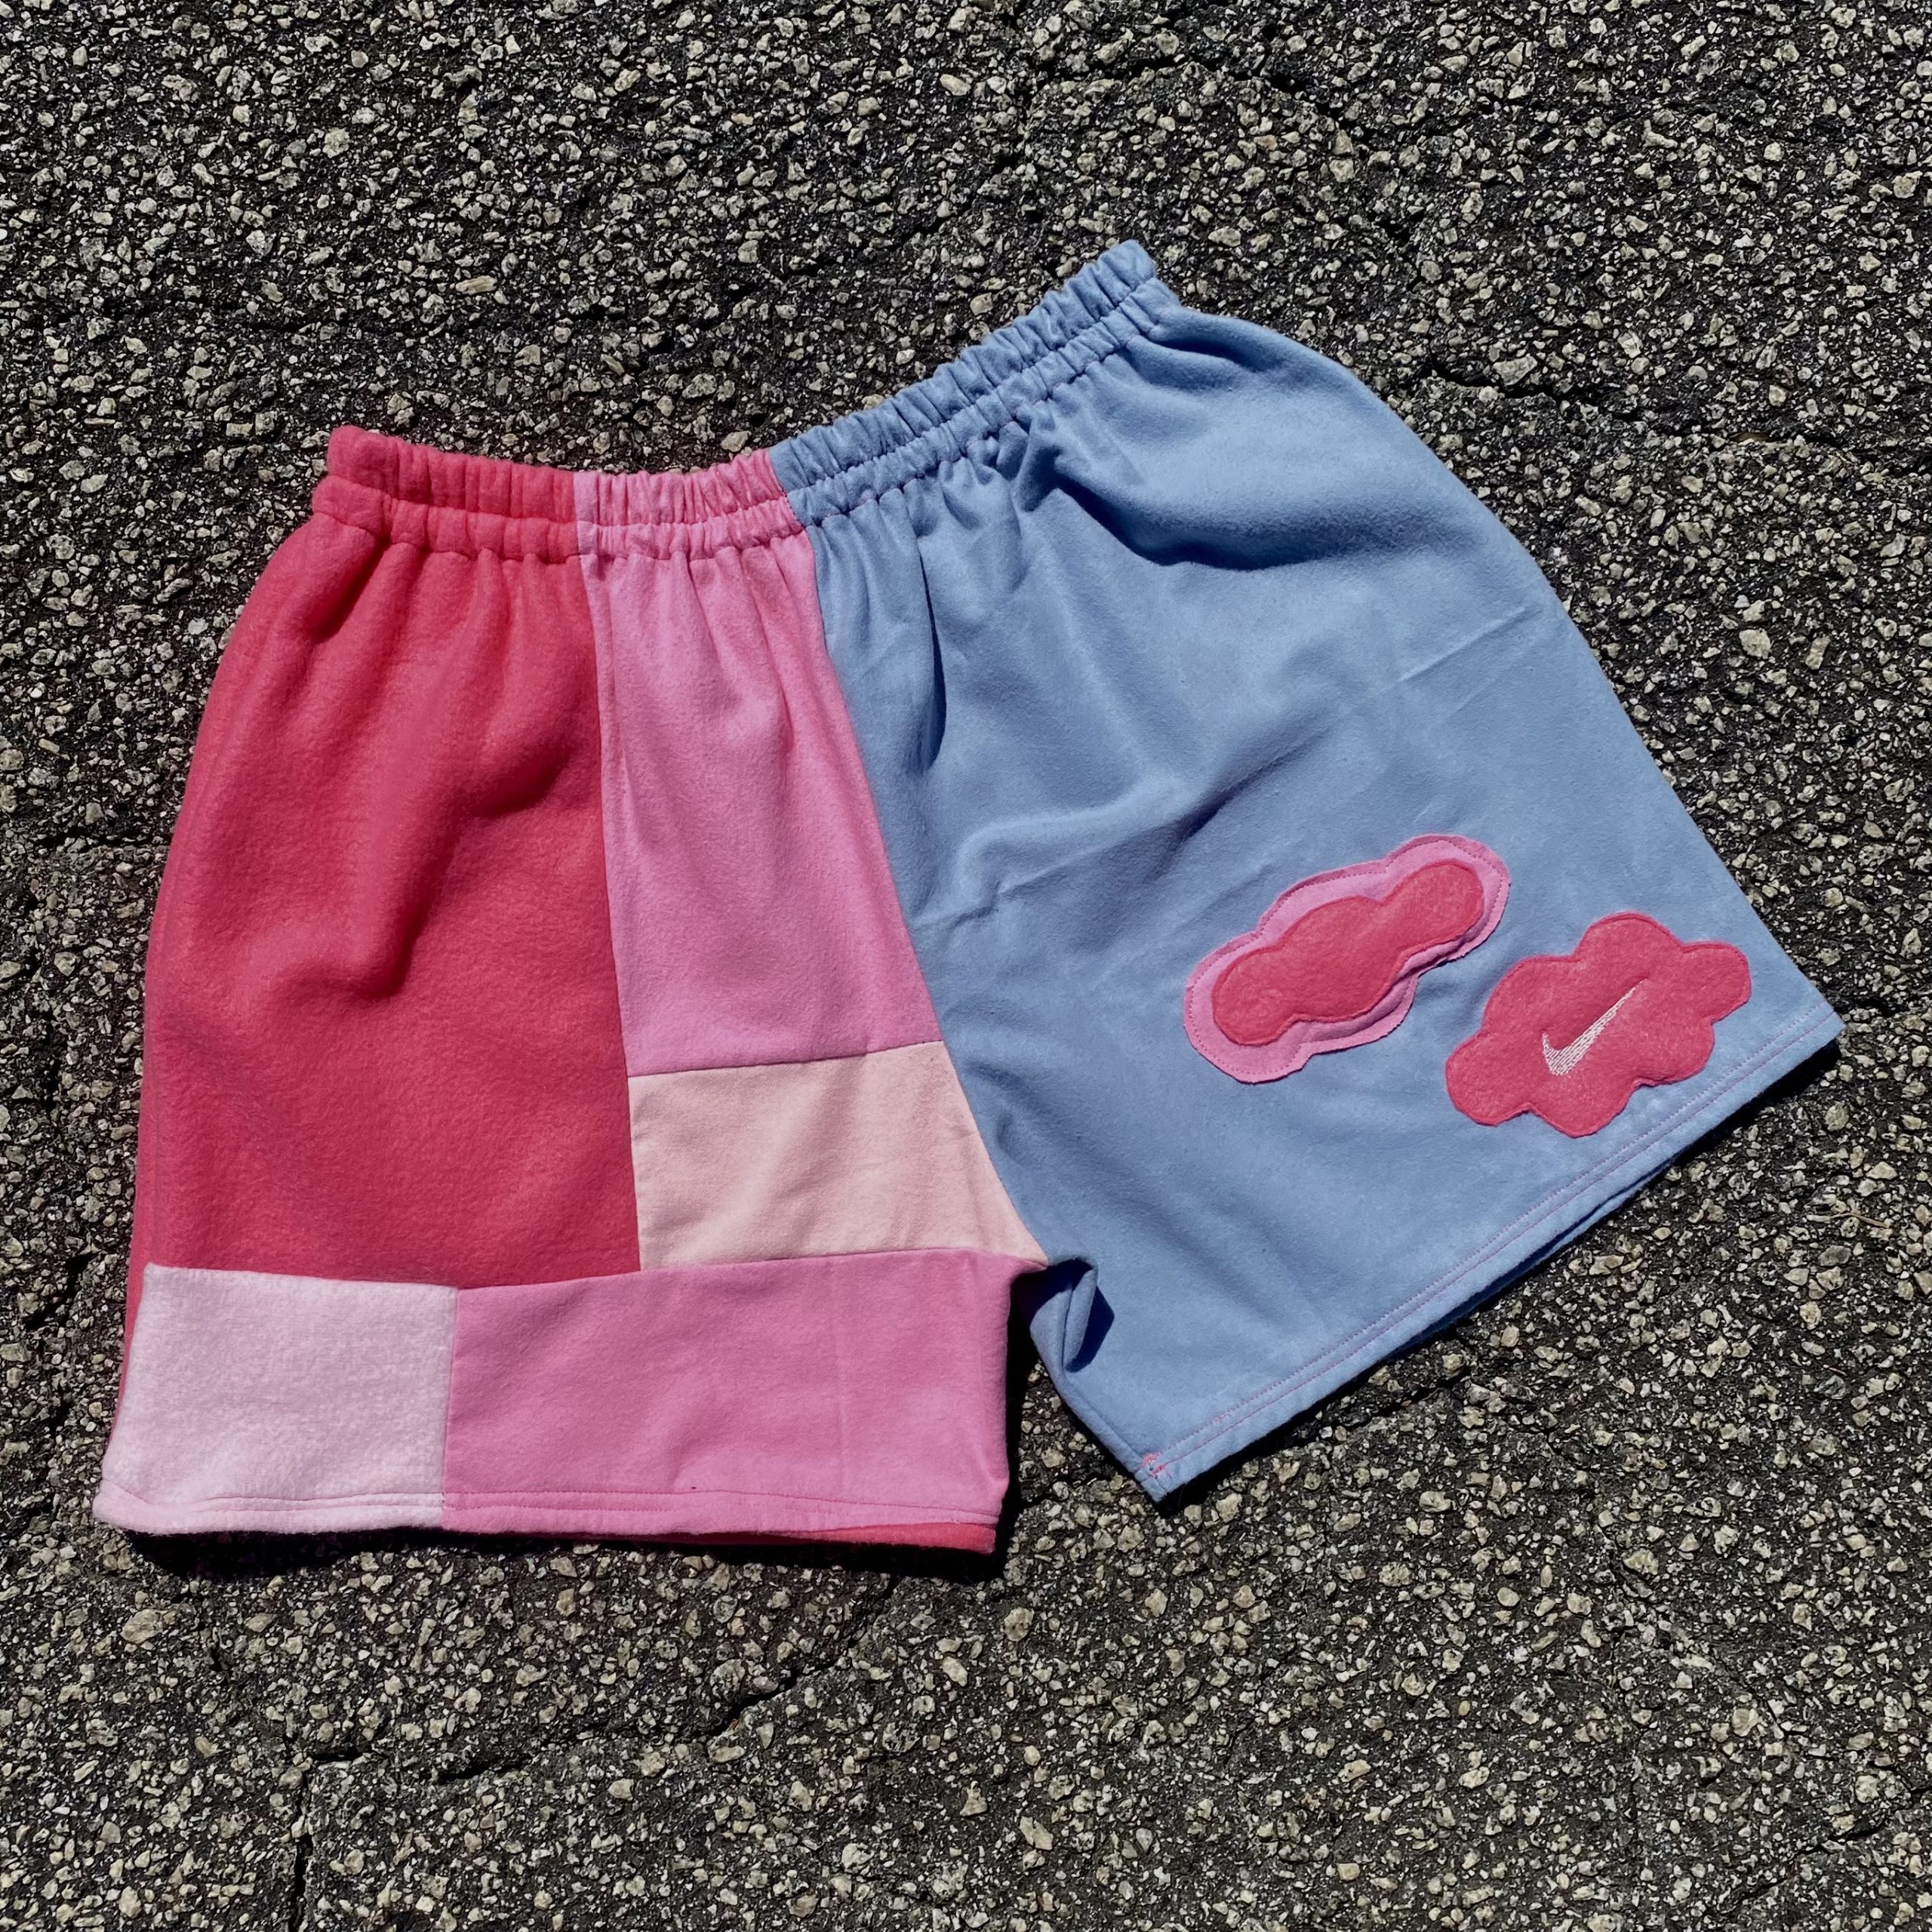 Two Cotton Candy Nike Shorts with pink and blue patches on them.